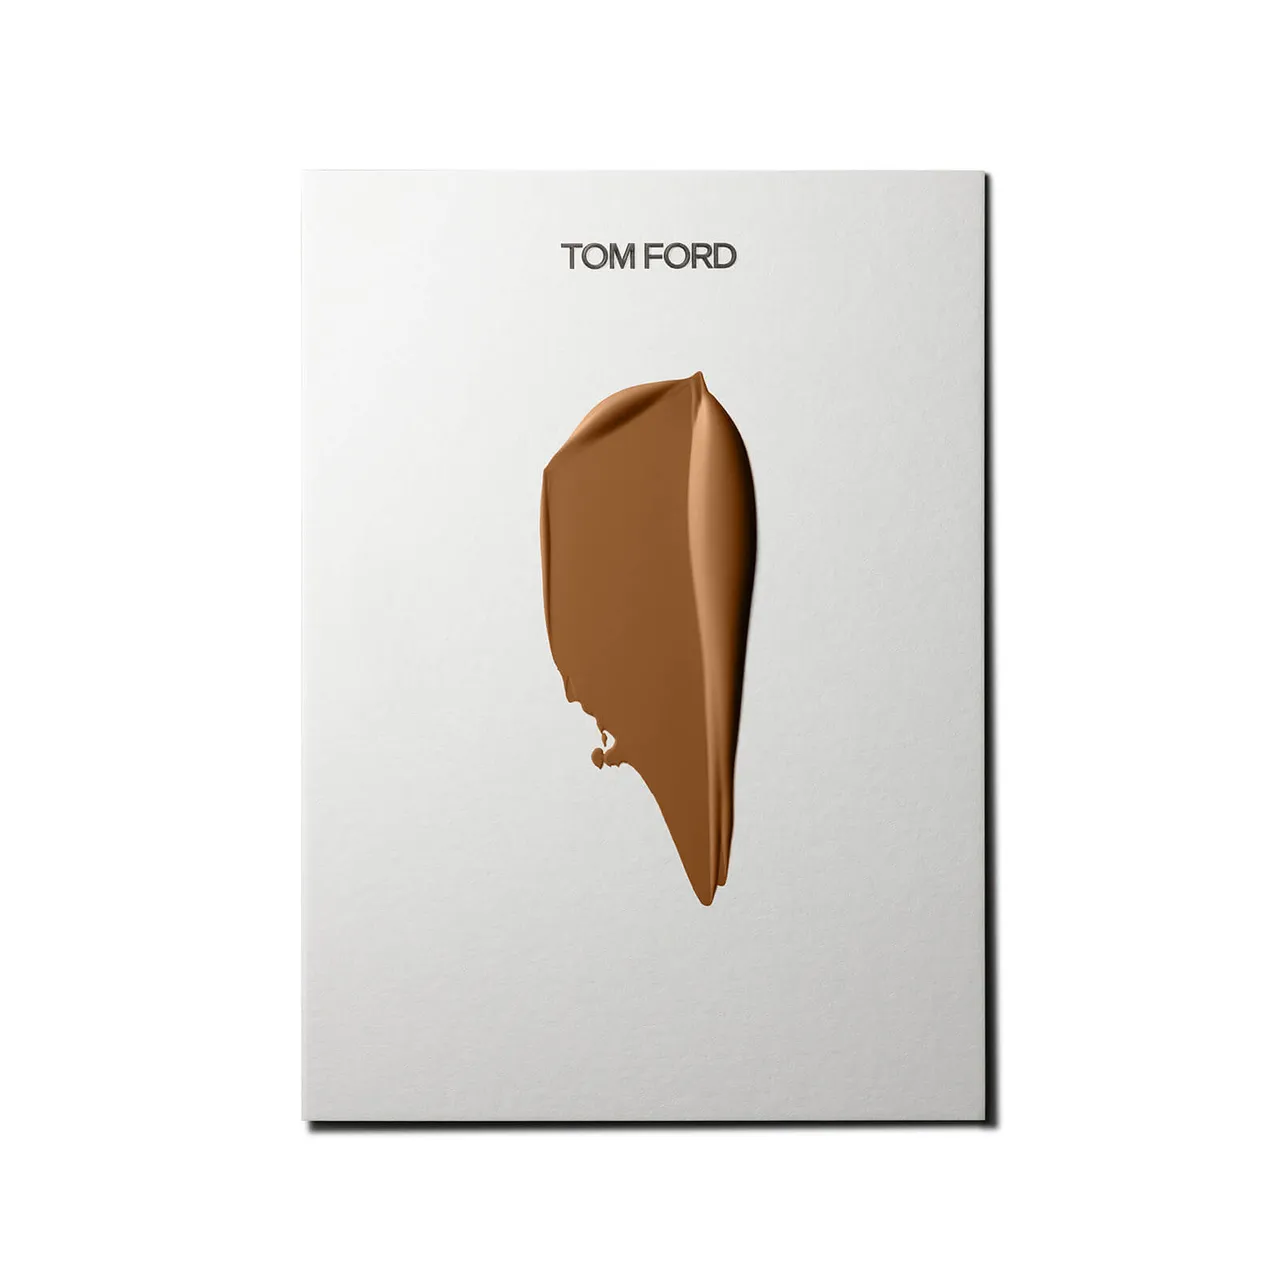 Tom Ford Traceless Soft Matte Foundation 30ml (Various Shades) - Warm Almond